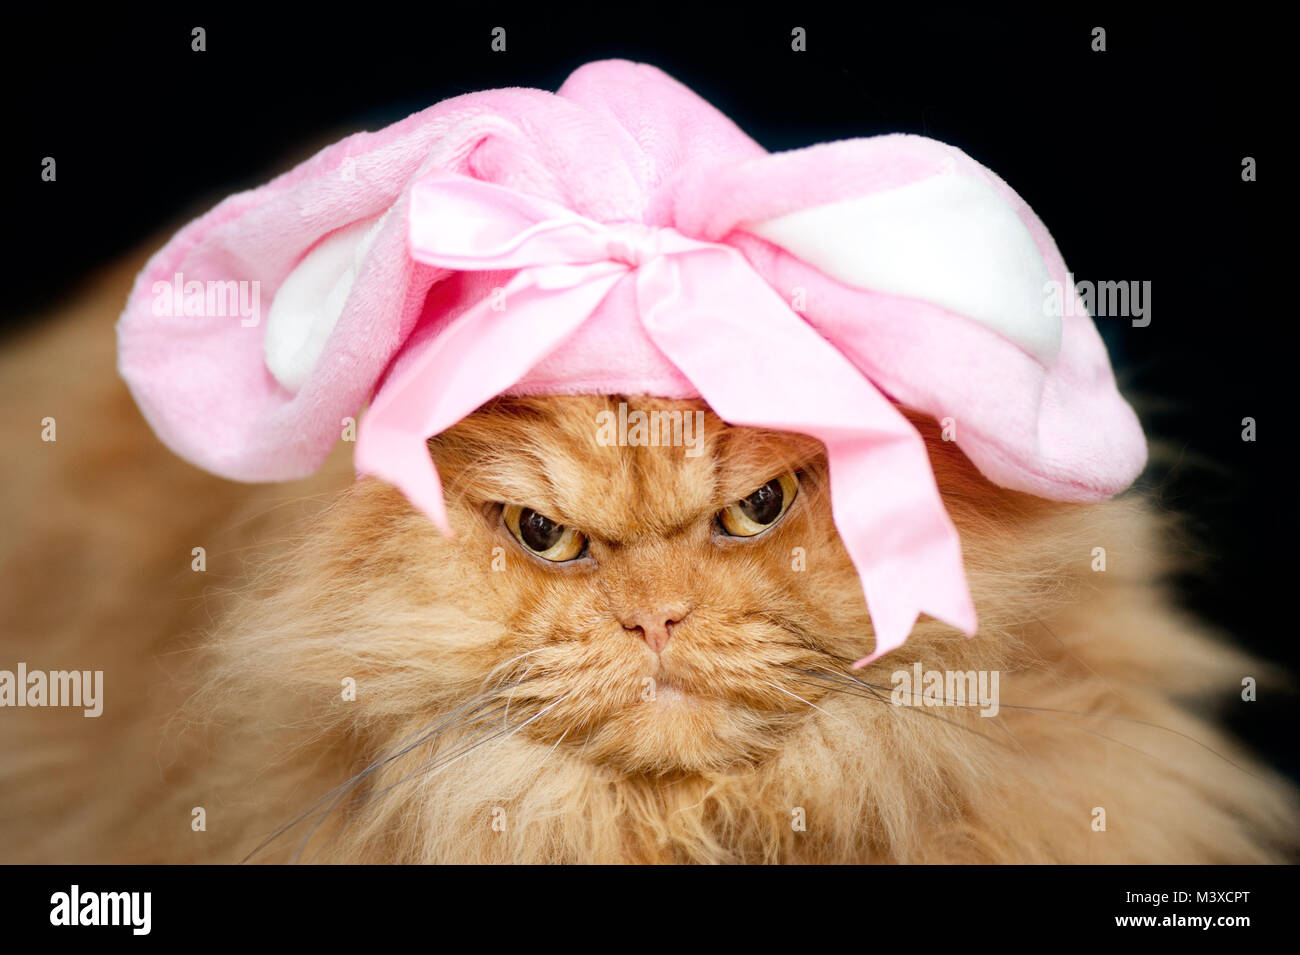 Close up portrait of orange Persian cat with bunny ears hat Stock Photo